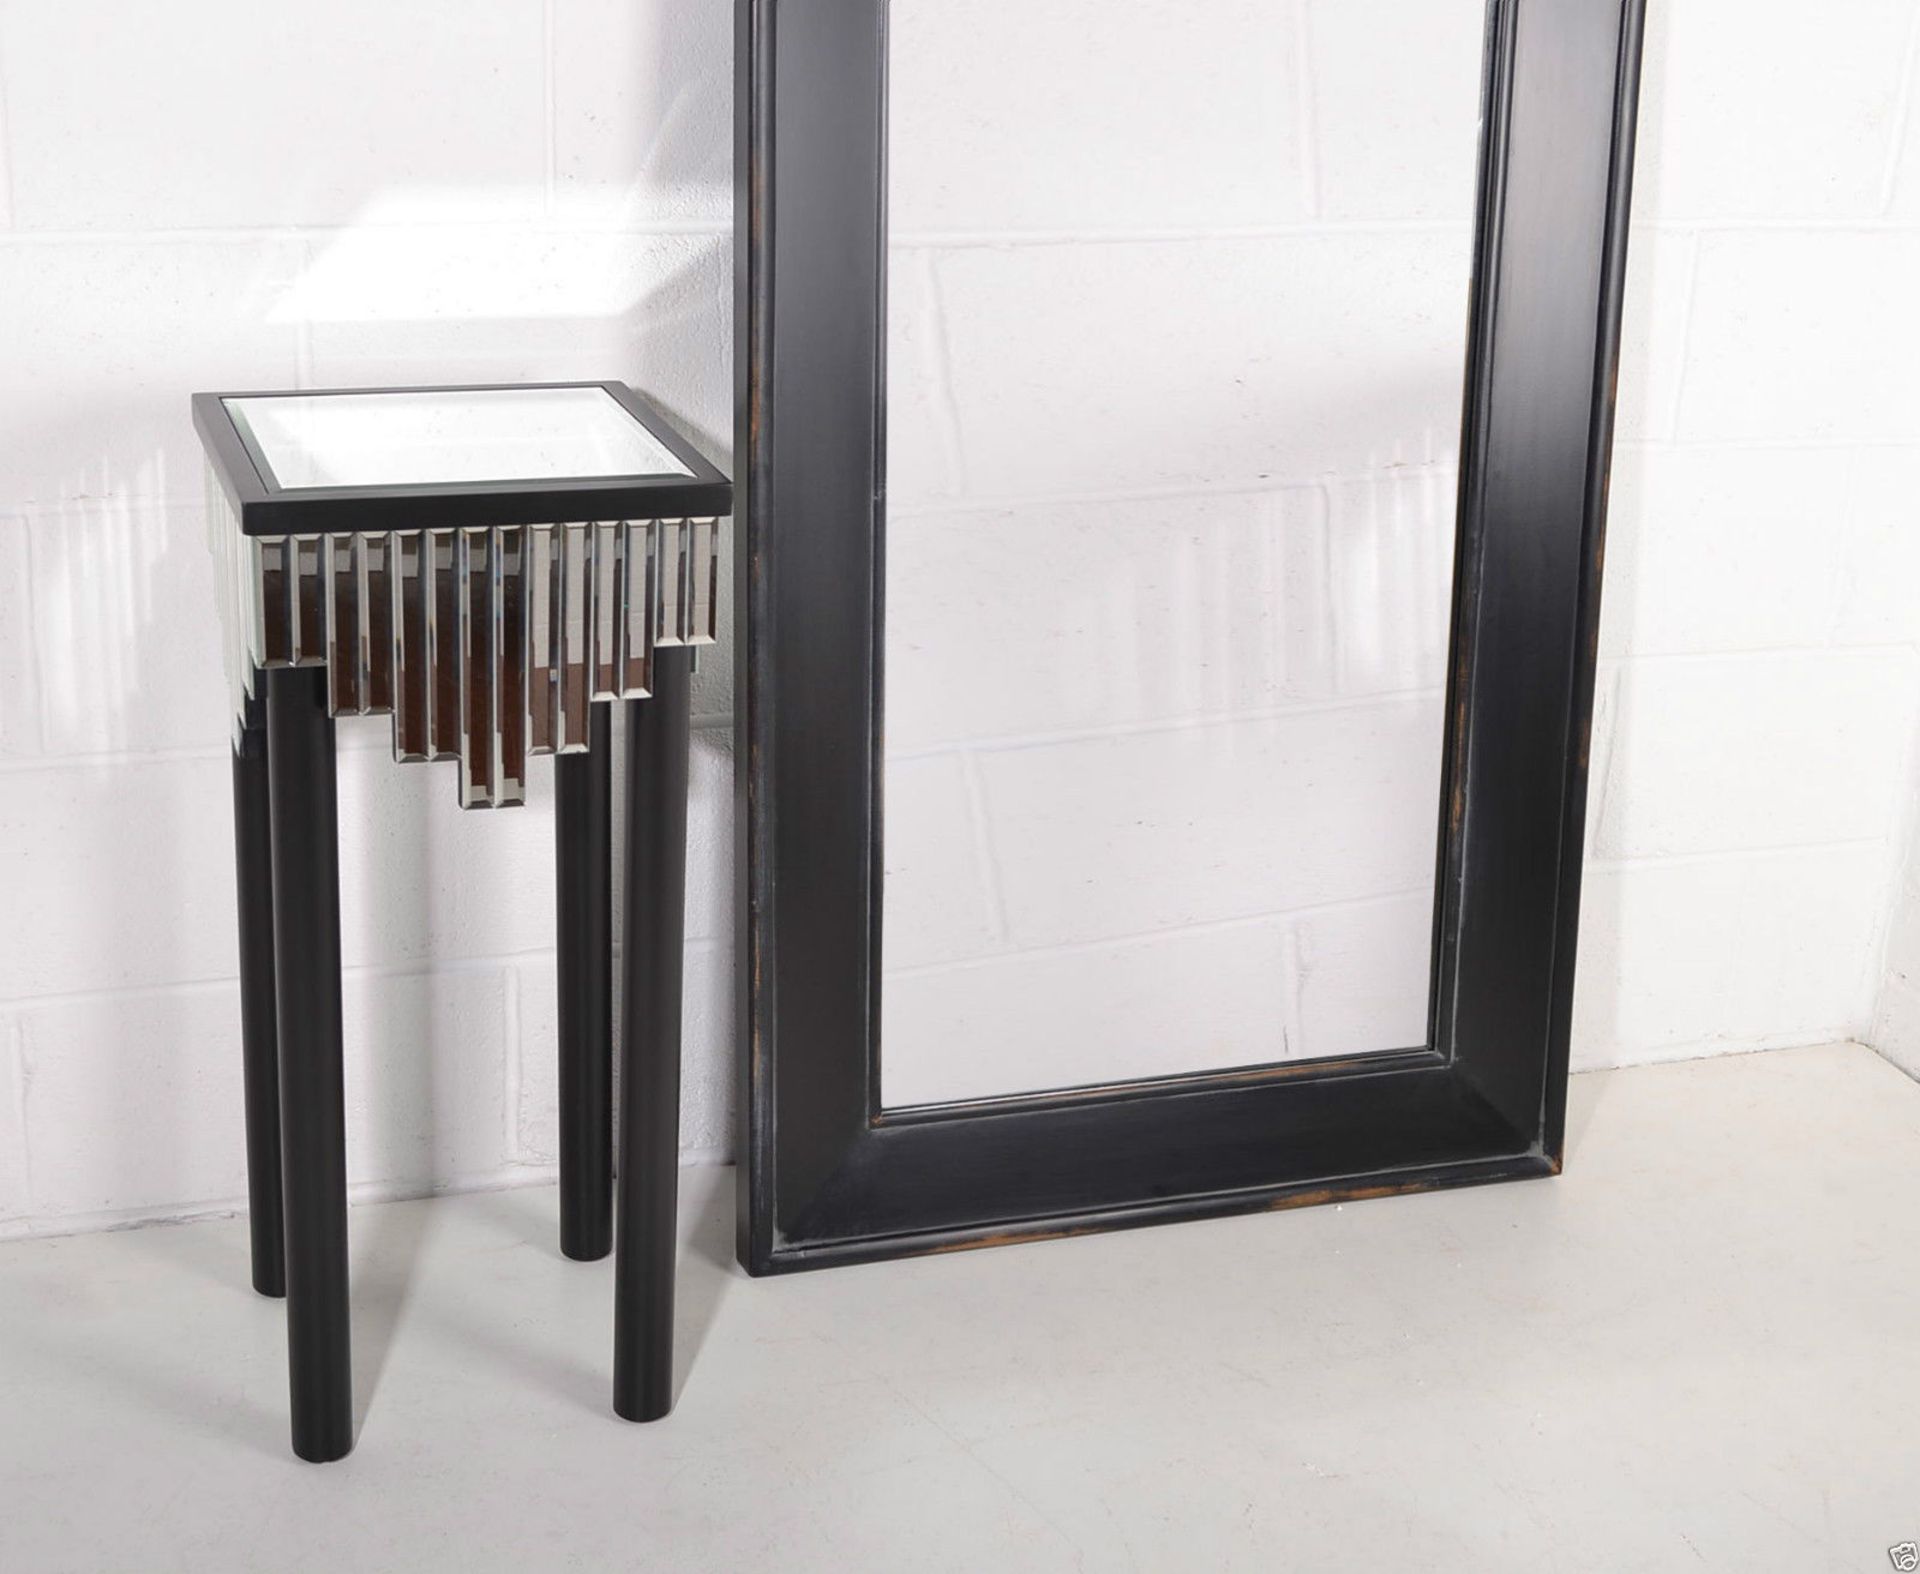 NEW Huge Noir Black Rectangular Mirror, Shabby Chic MPN 13558 RRP £350 New & boxed perfect stock. - Image 2 of 4